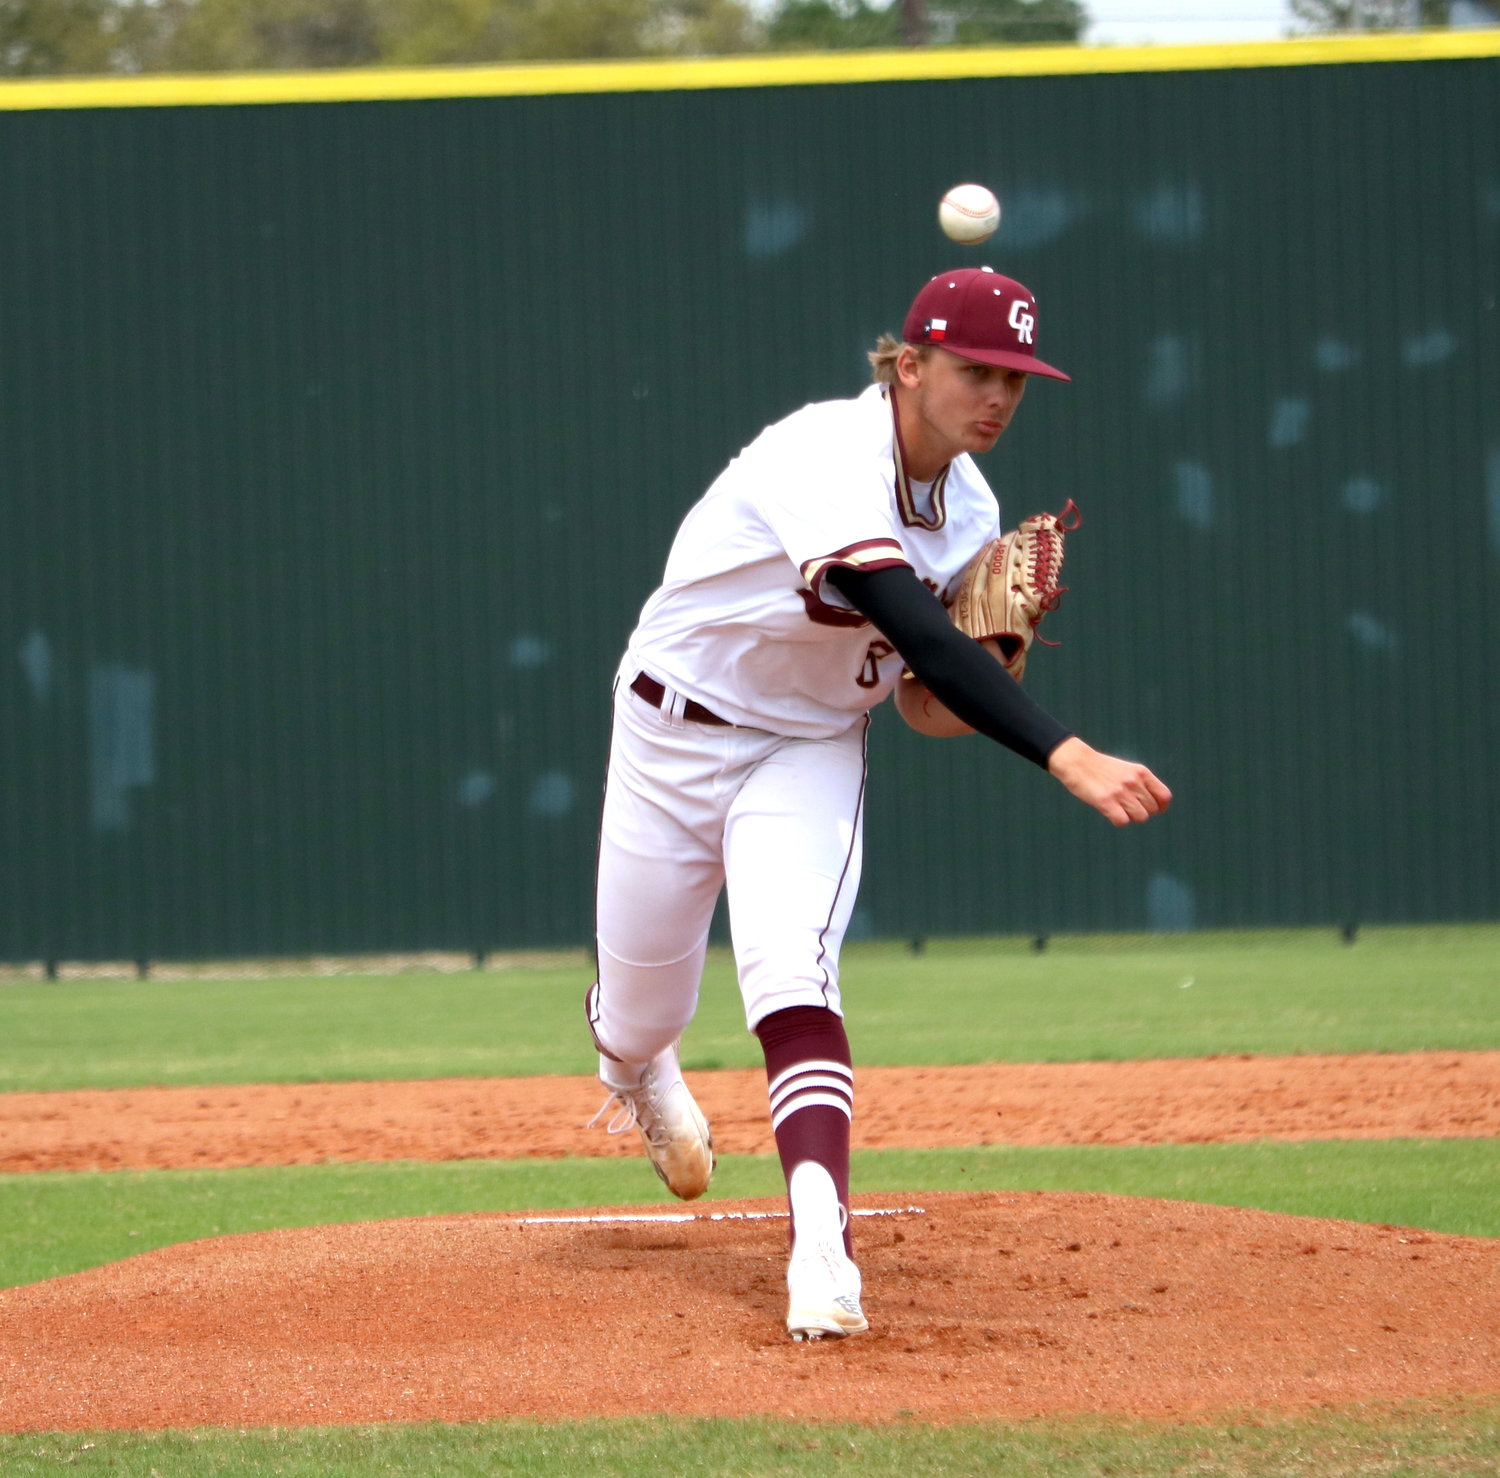 Brayden Hodge pithes during Tuesday's game between Tompkins and Cinco Ranch at the Cinco Ranch baseball field.